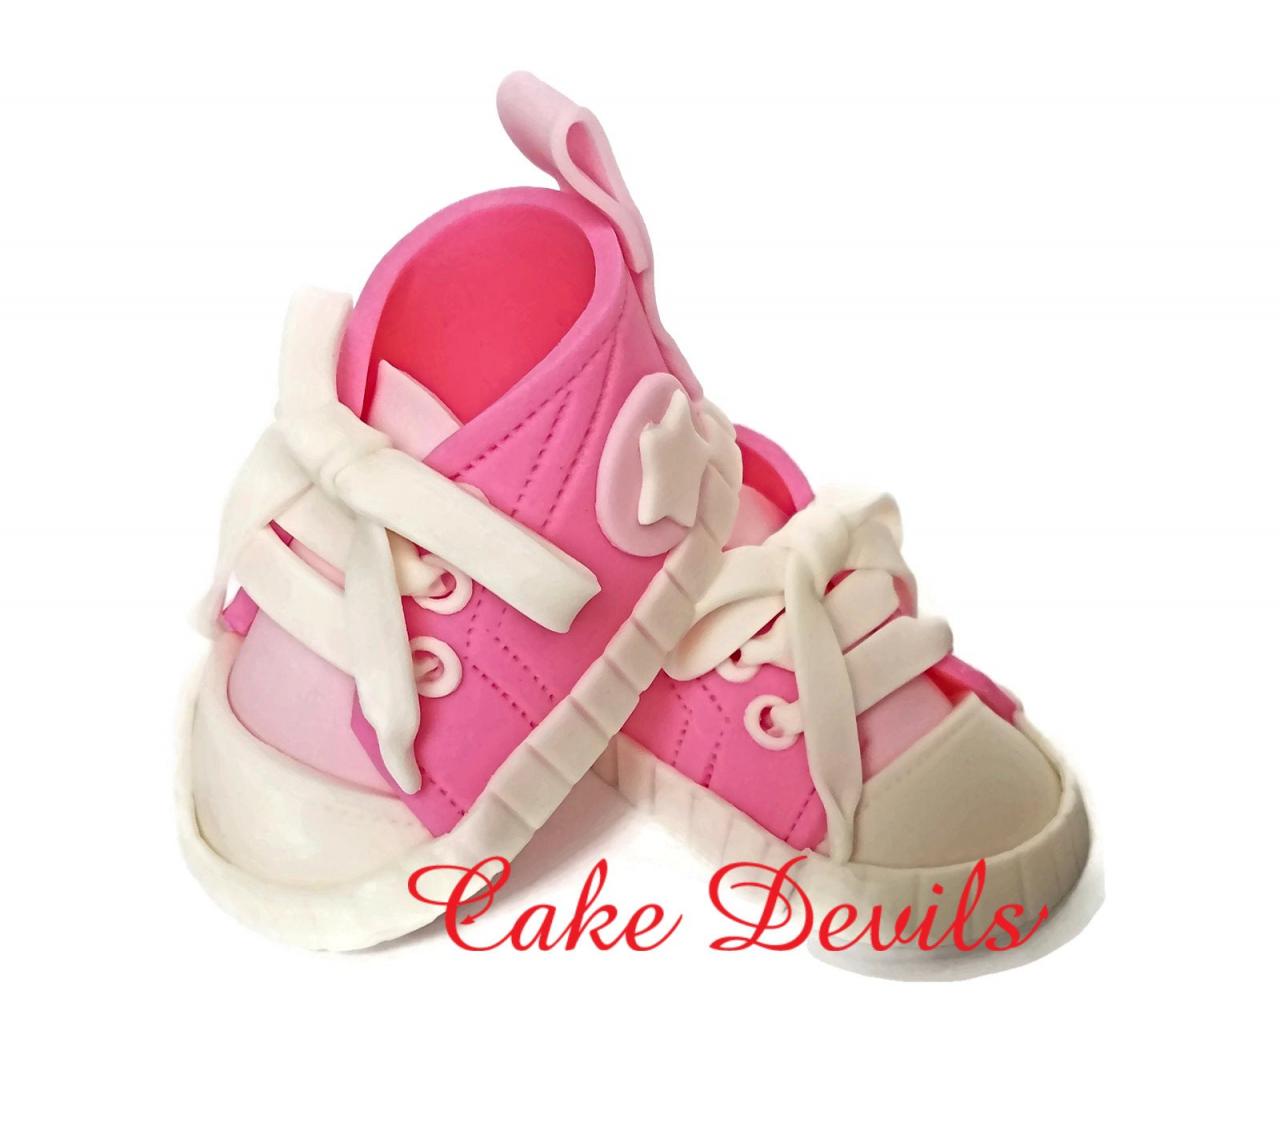 Baby Shower Sneakers Cake Topper, Fondant Sneakers With Grommets, Handmade Baby Sneakers, Baby Shower Cake Decorations, Baby Shoes